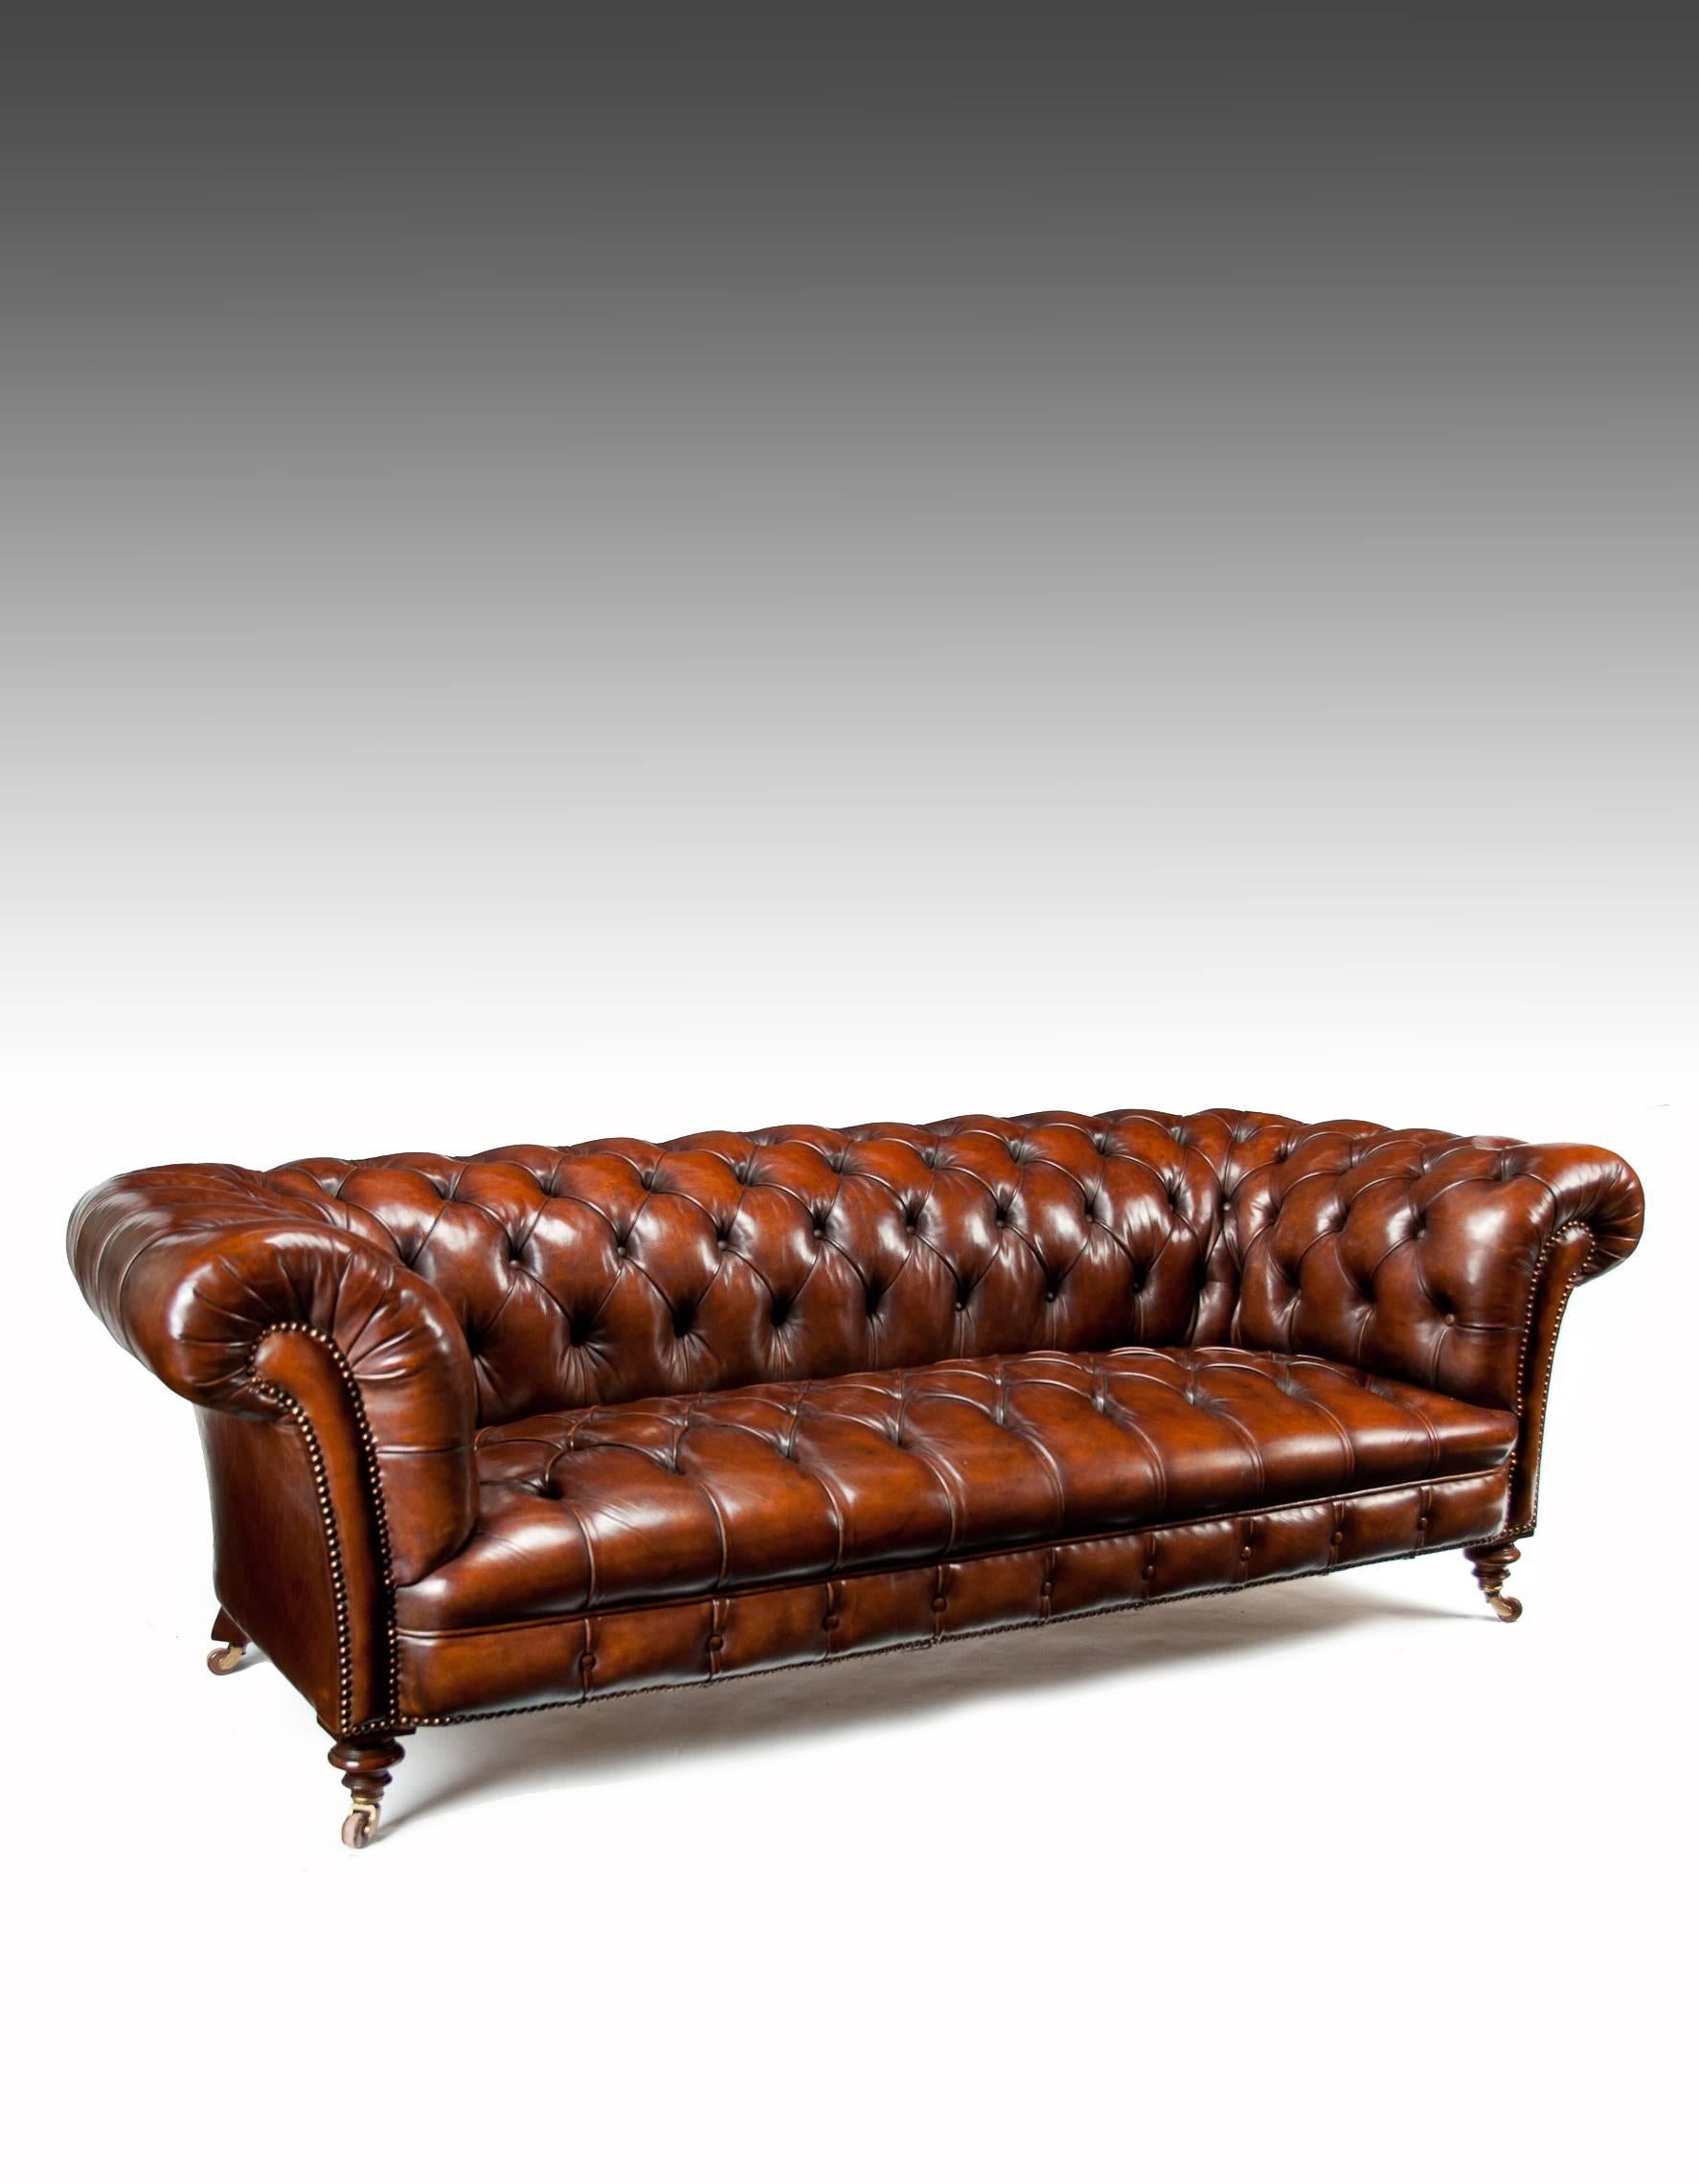 Turned Victorian James Jas Shoolbred Leather Walnut Chesterfield Fully Stamped